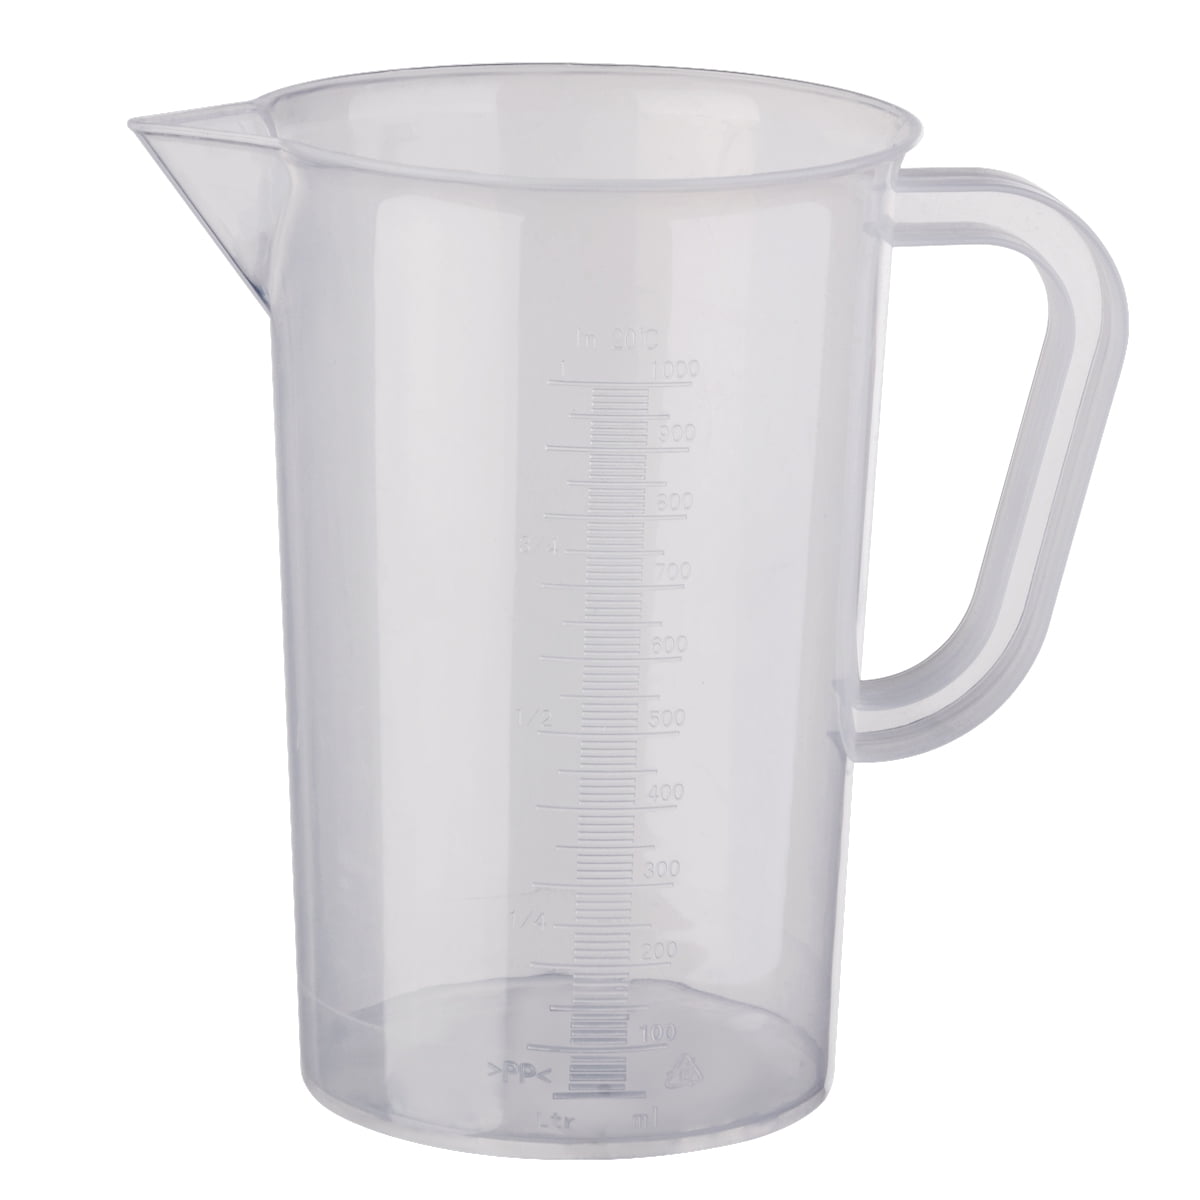 1000ML Sacle Cups Plastic Measuring Cups Transparent